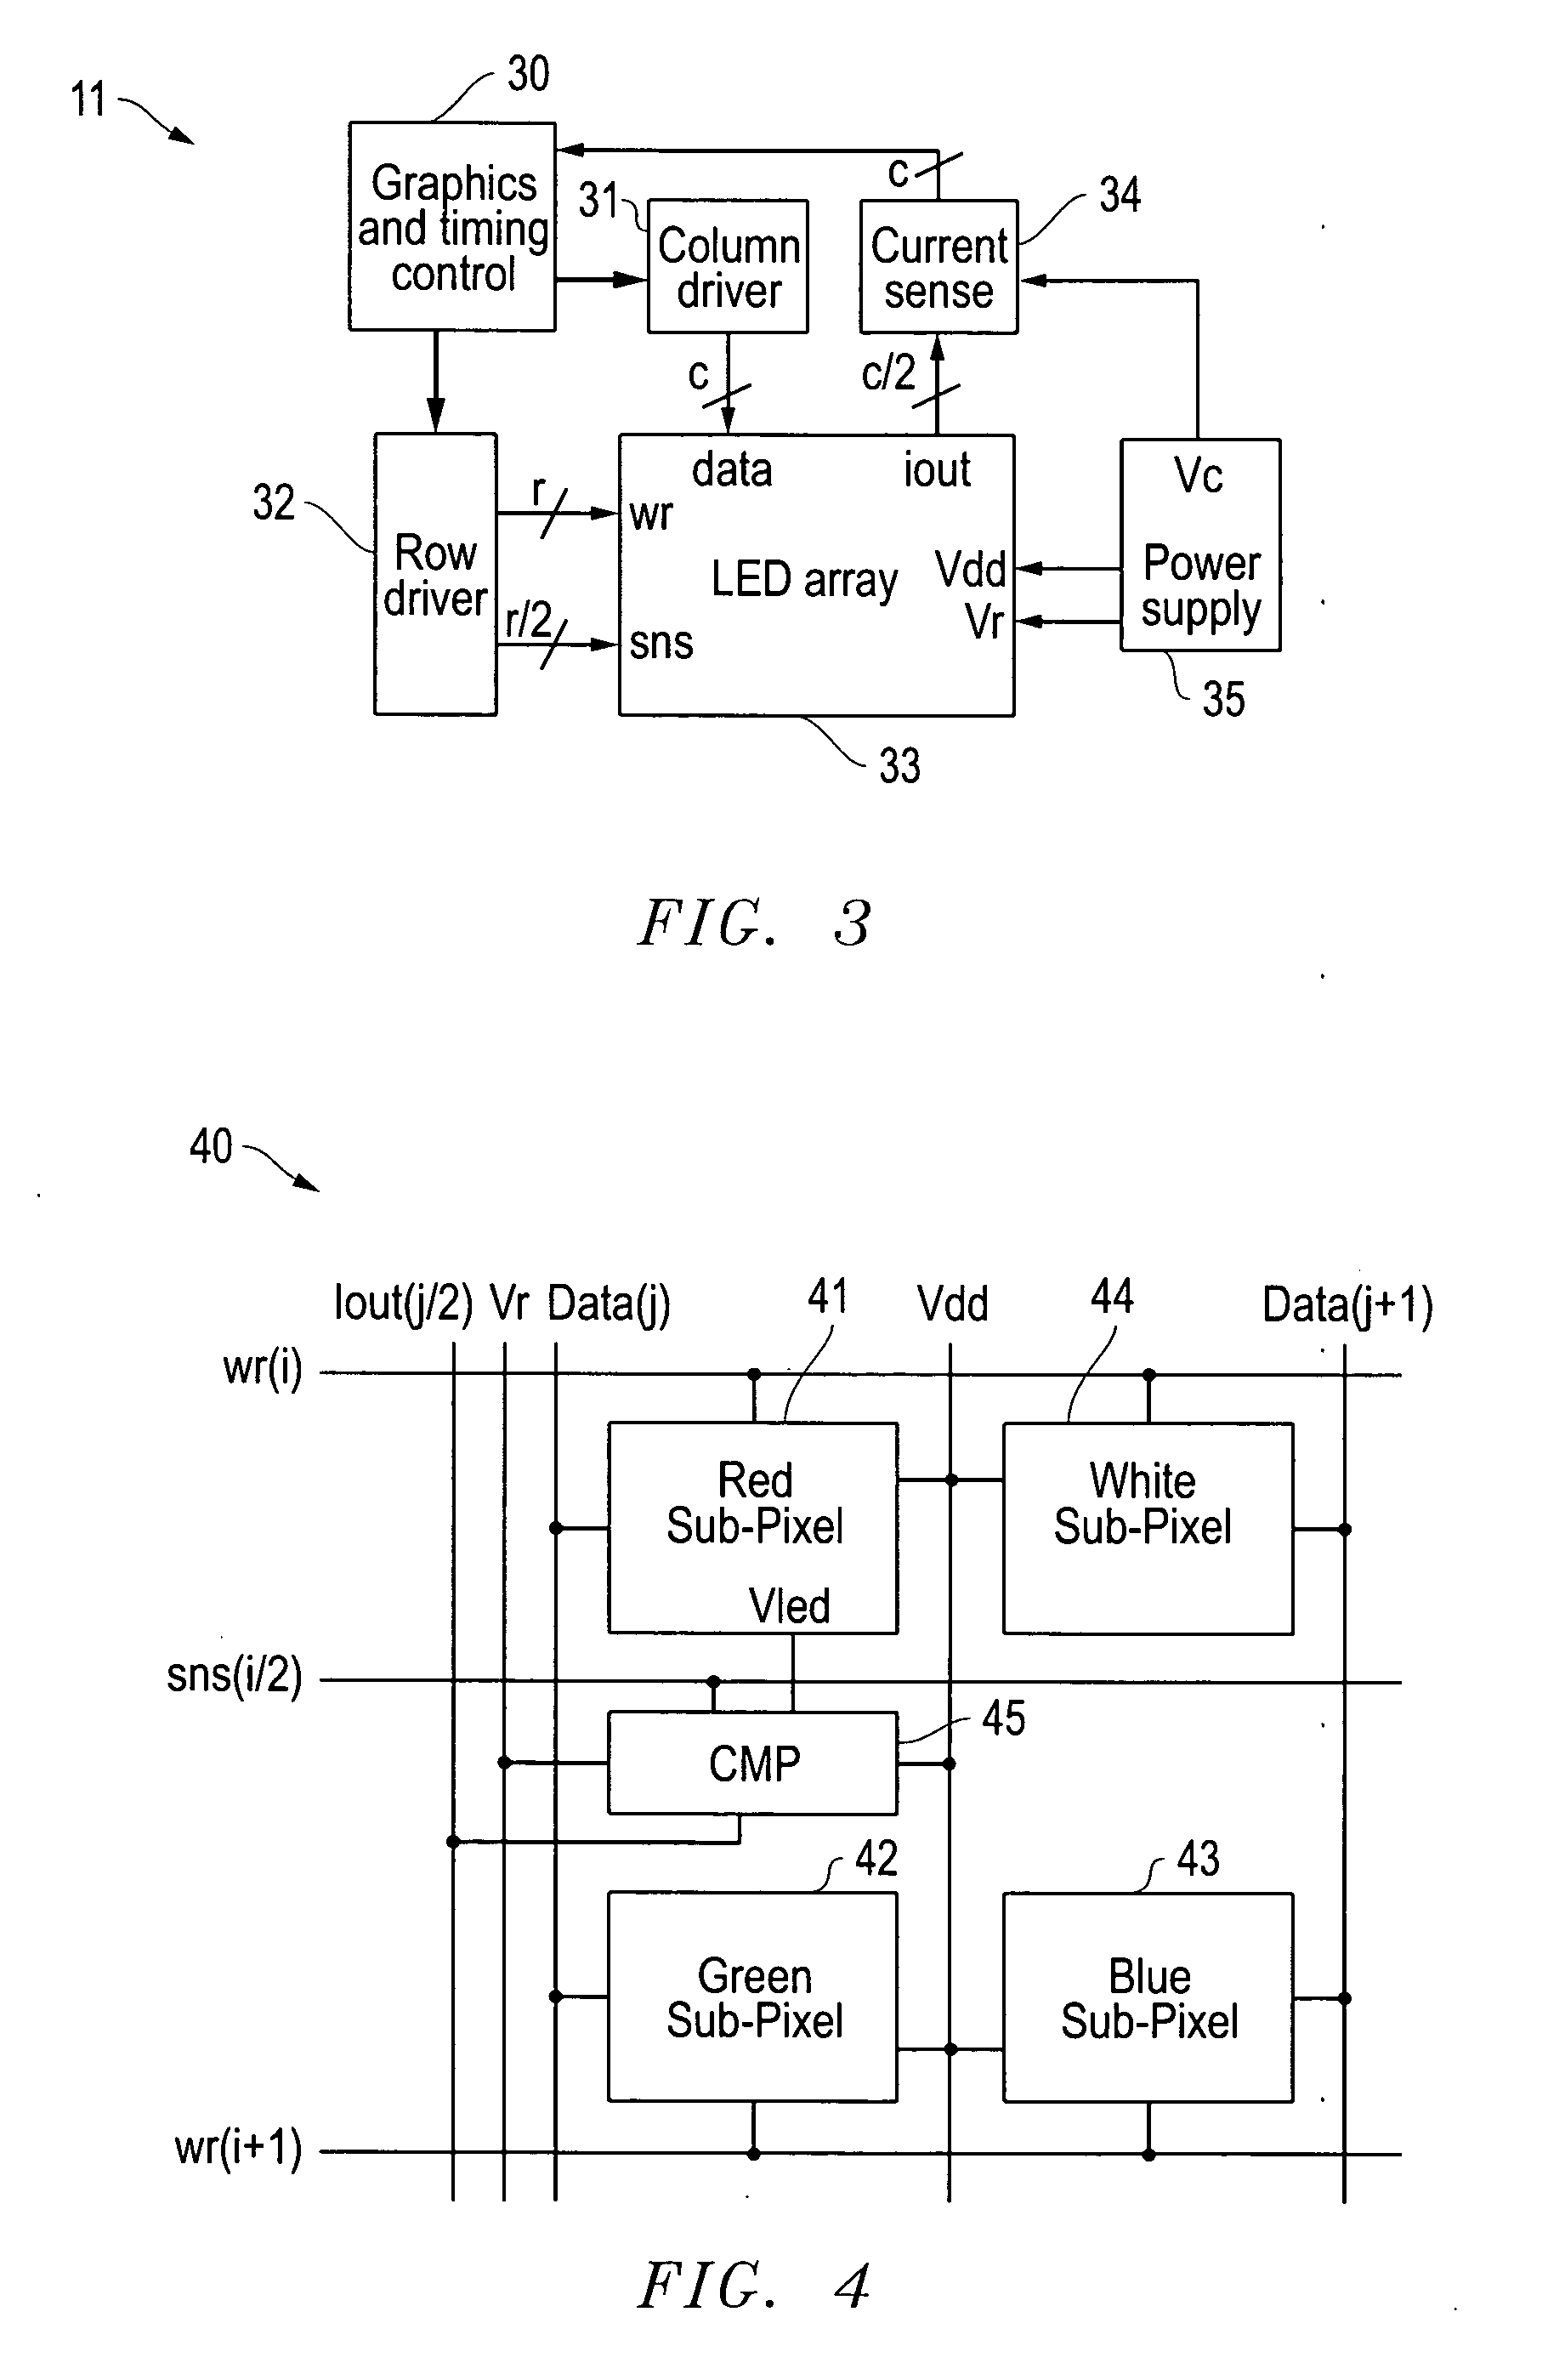 Display calibration systems and related methods